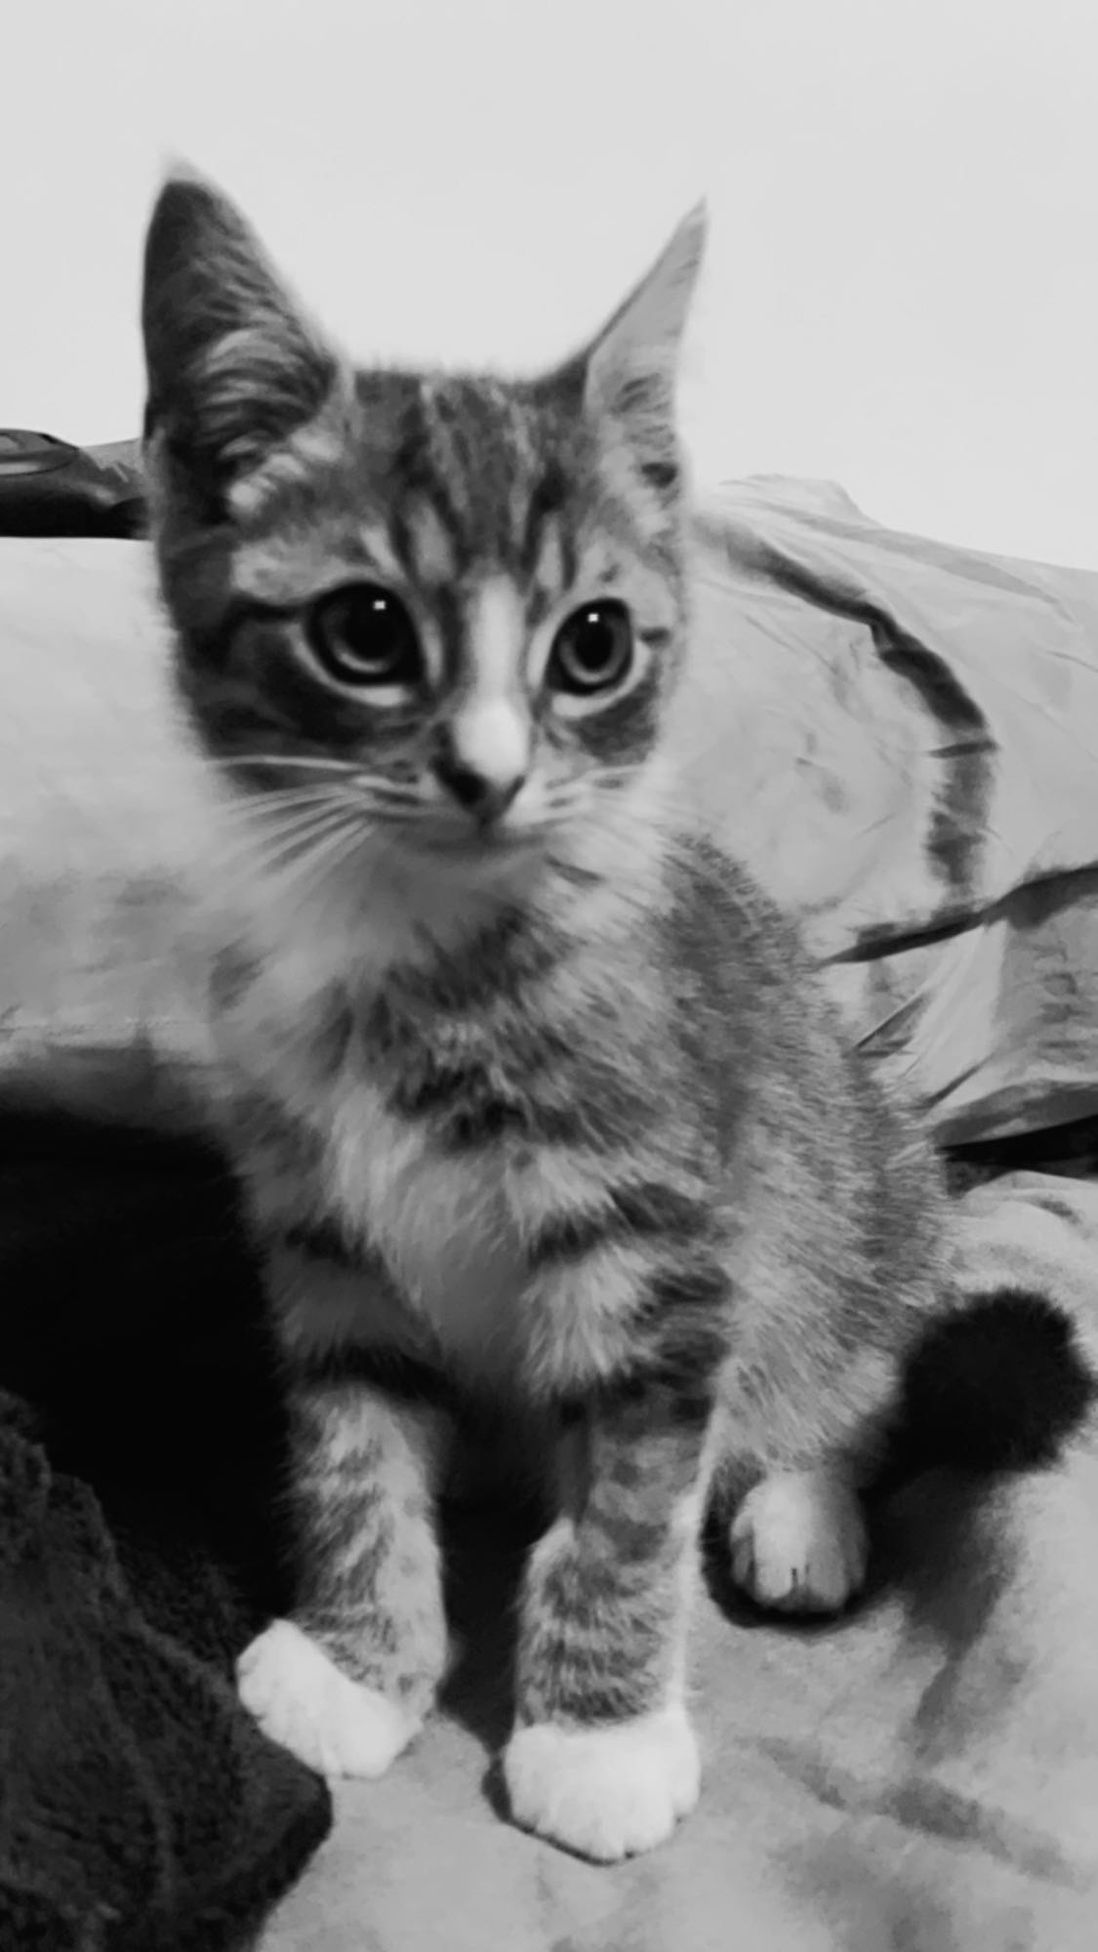 Franklin the kitten in a black and white picture